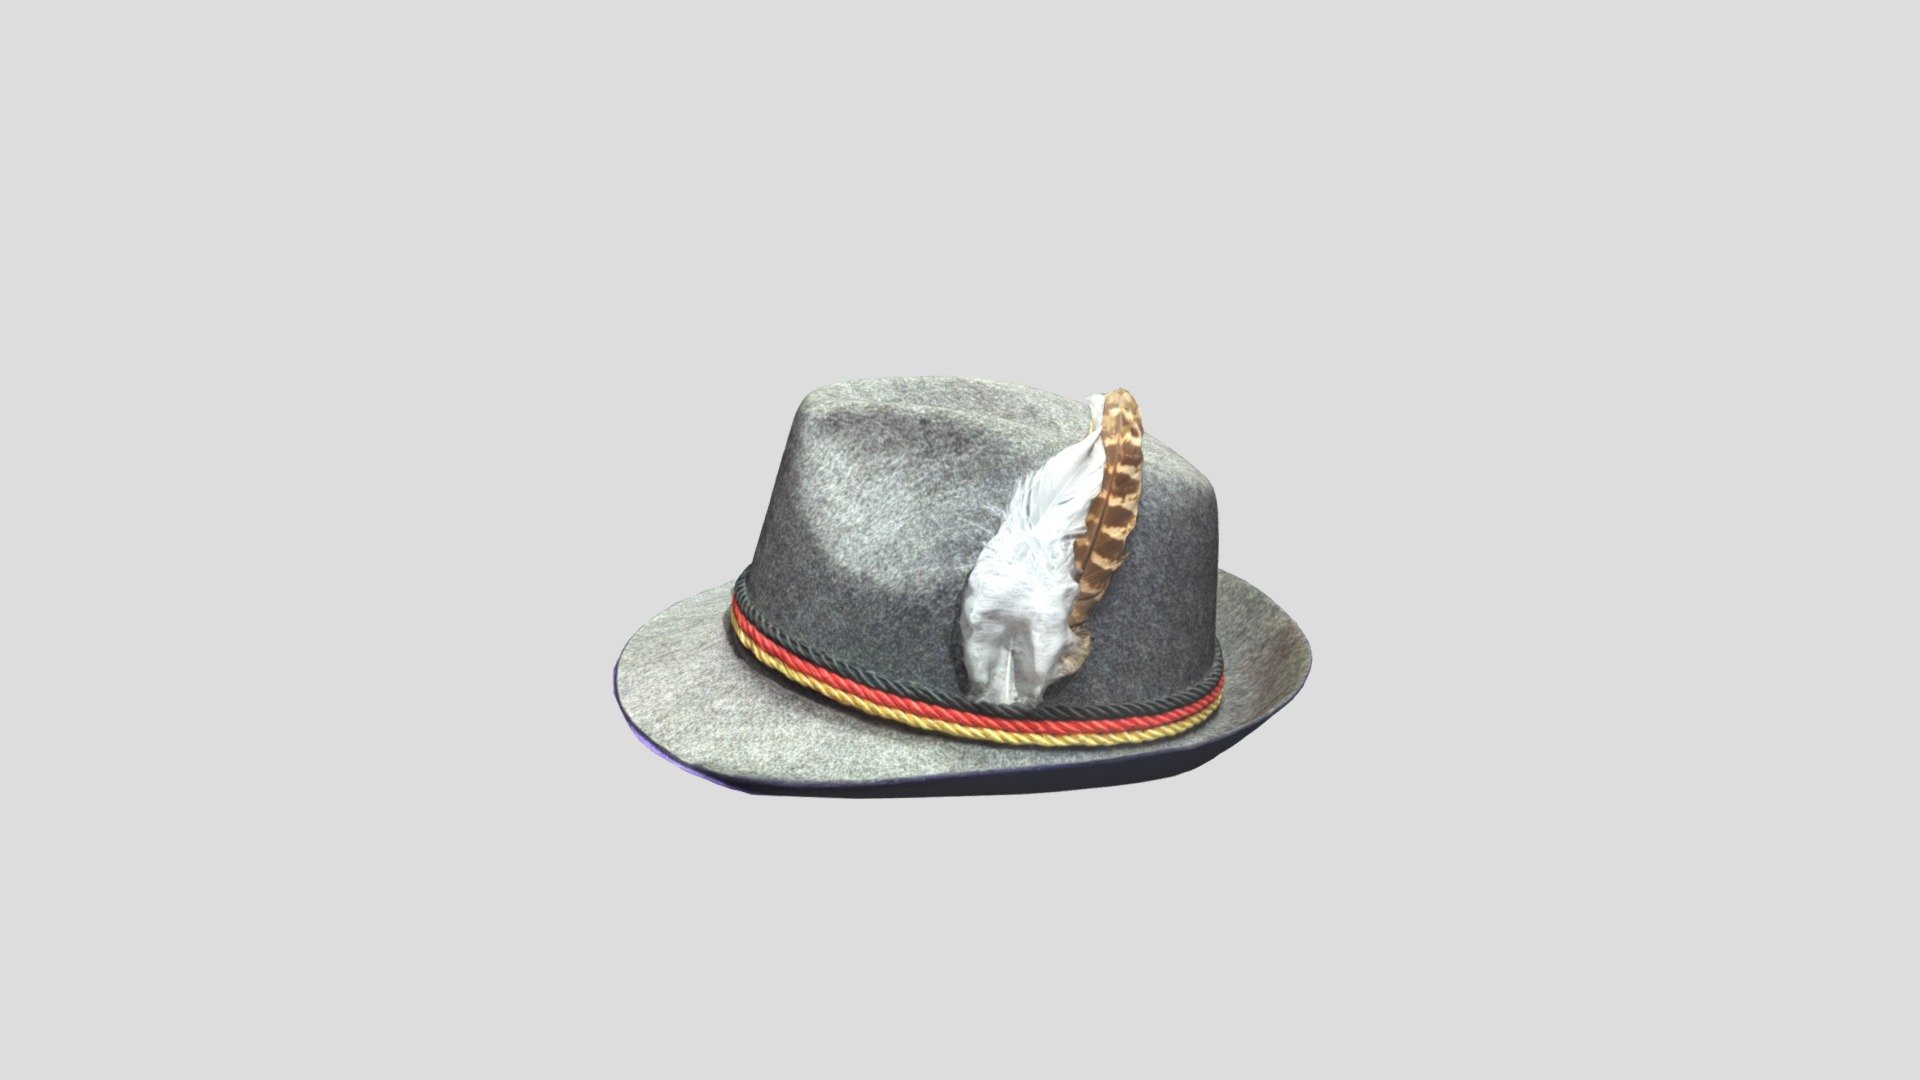 Bavarian-style German hat with feather. This is my actual hat which I scanned in with the Polycam (Android) app, and it has not been edited in any way, so you may have to do some work (reduce polys, etc.) to optimize it.

I have no experience whatsoever designing (and almost none editing) 3D models, so I am offering this raw scan AS IS, free for anyone who may be able to use it 3d model